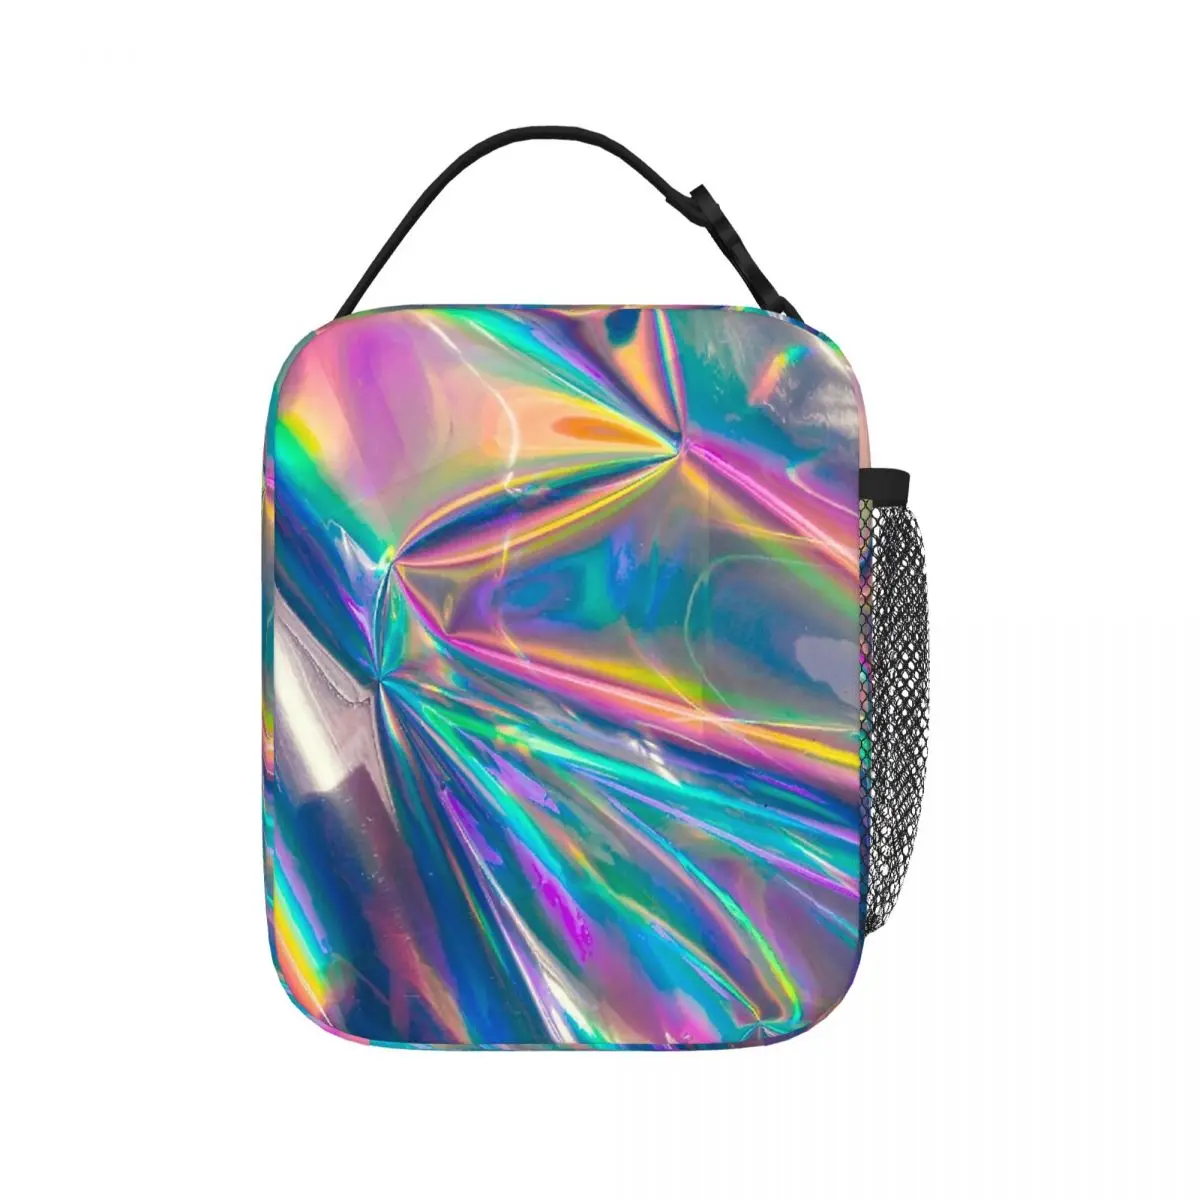 

Holographic Insulated Lunch Bags Waterproof Picnic Bags Thermal Cooler Lunch Box Lunch Tote for Woman Work Children School